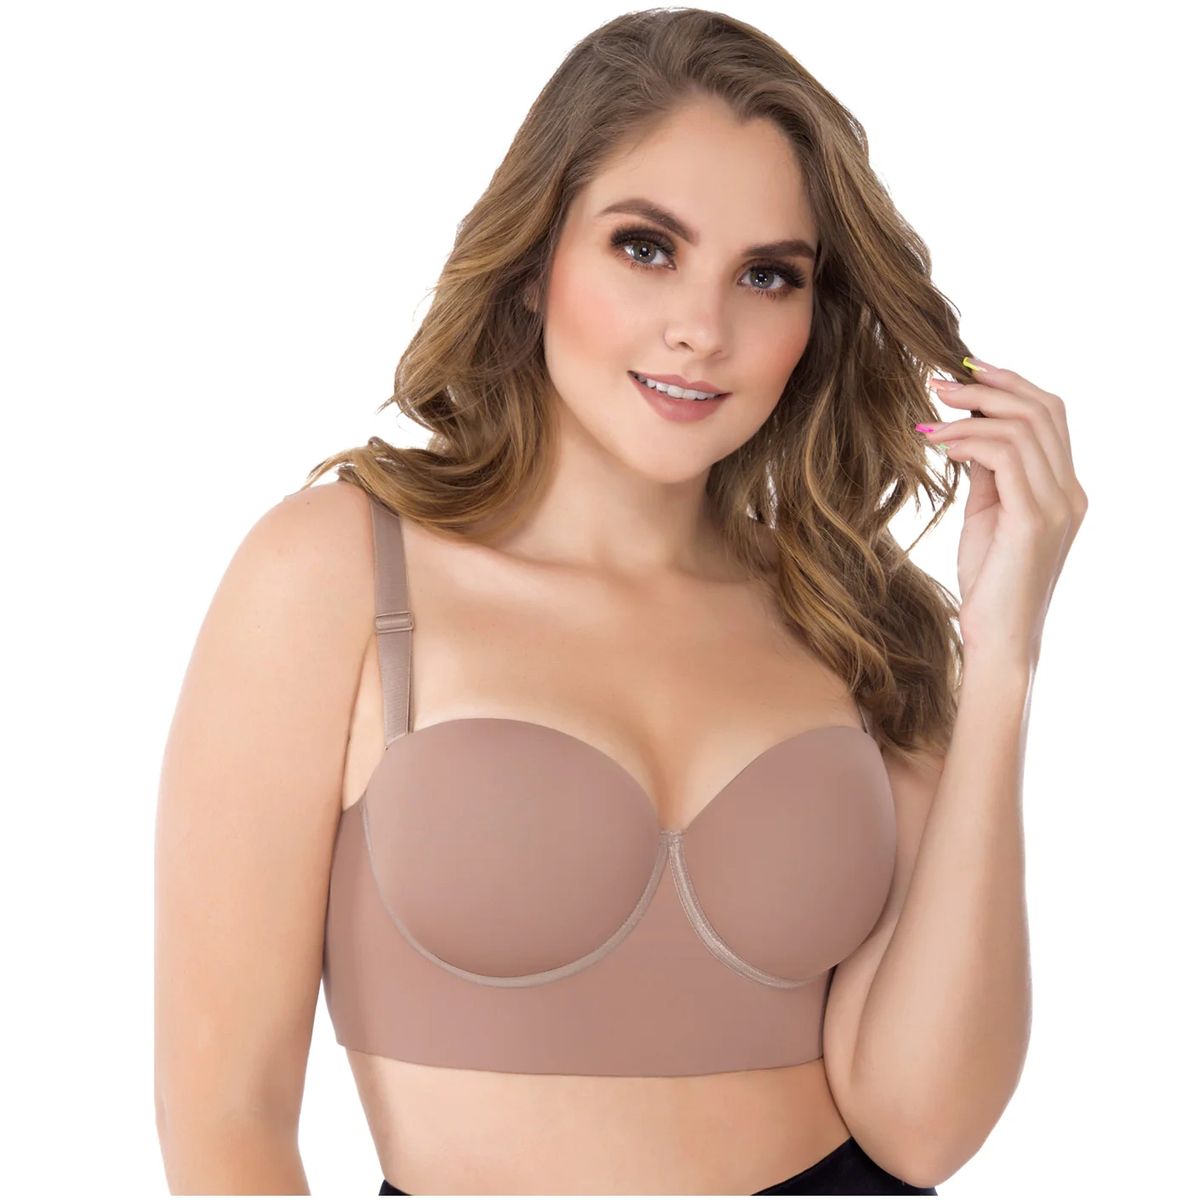 UPLADY 8034 FIRM CONTROL STRAPLESS BRA FOR WOMEN (Size: 36B/L, Color: Beige)